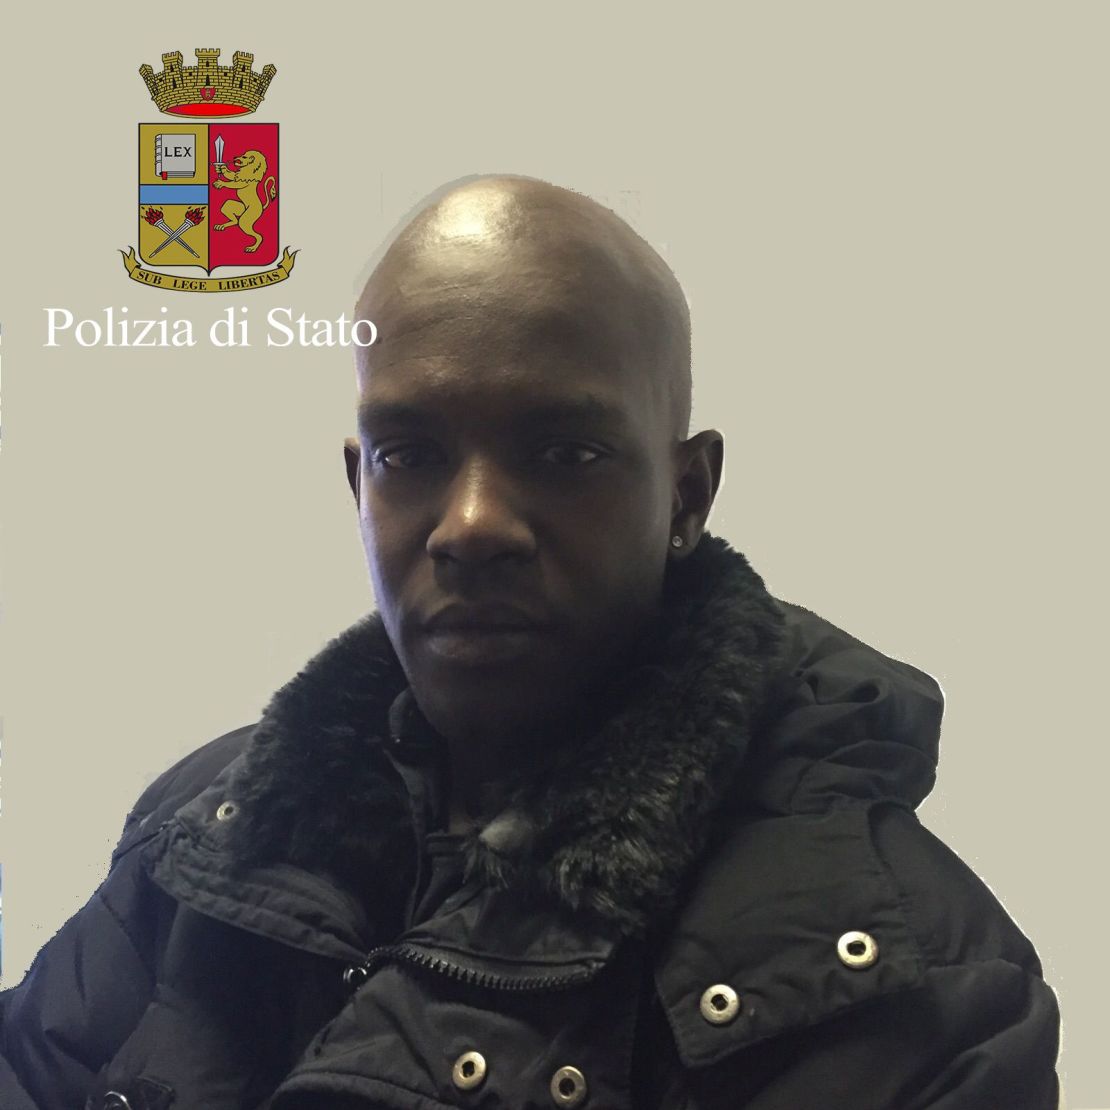 Suspect Cheikh Tidiane Diaw, who Italian police arrested over Olsen's death.